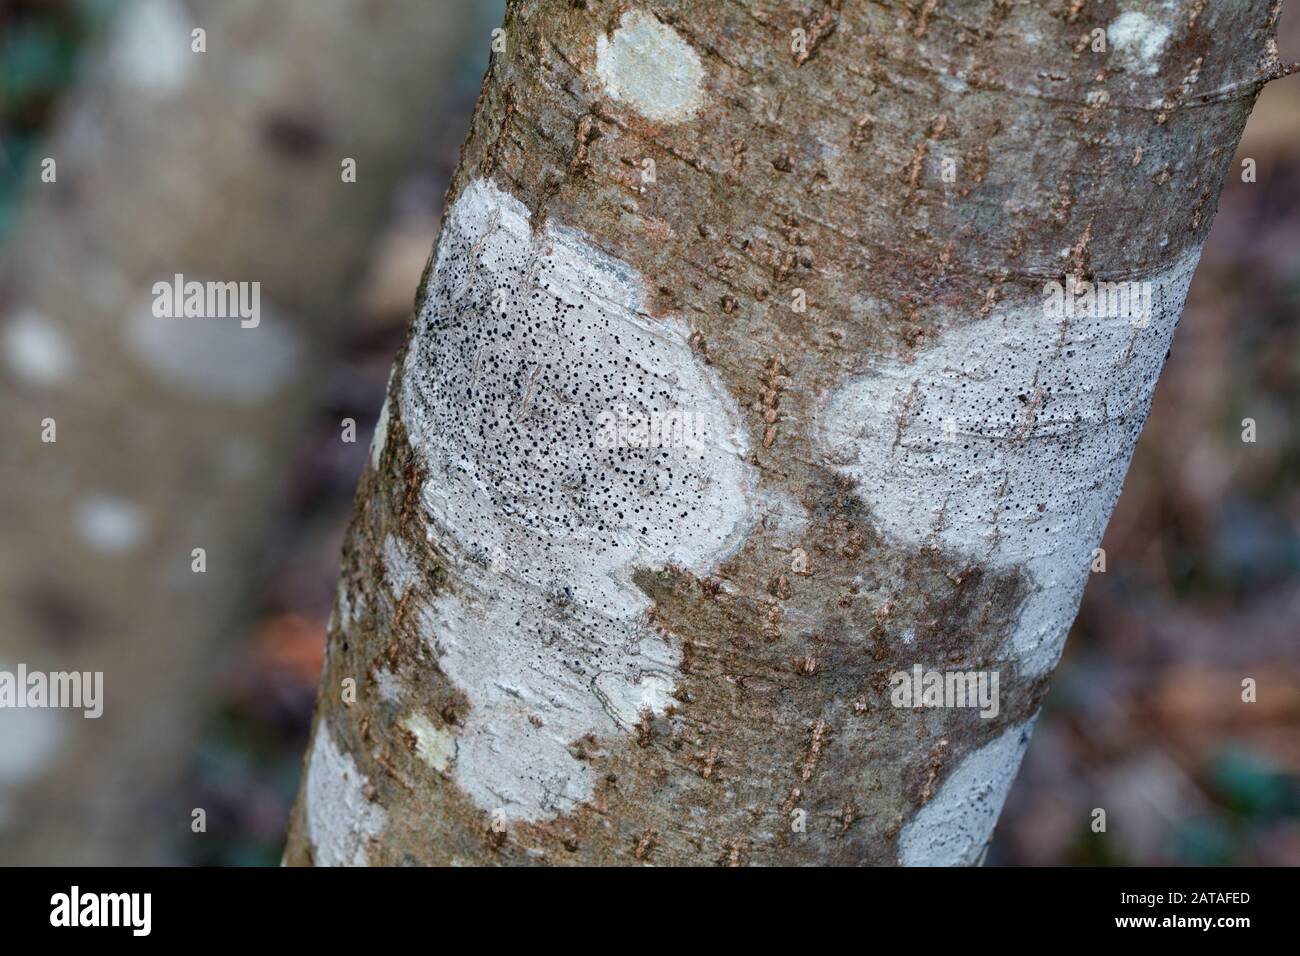 Epiphytic lichens on a tree trunk in Central Slovakia, Europe Stock Photo